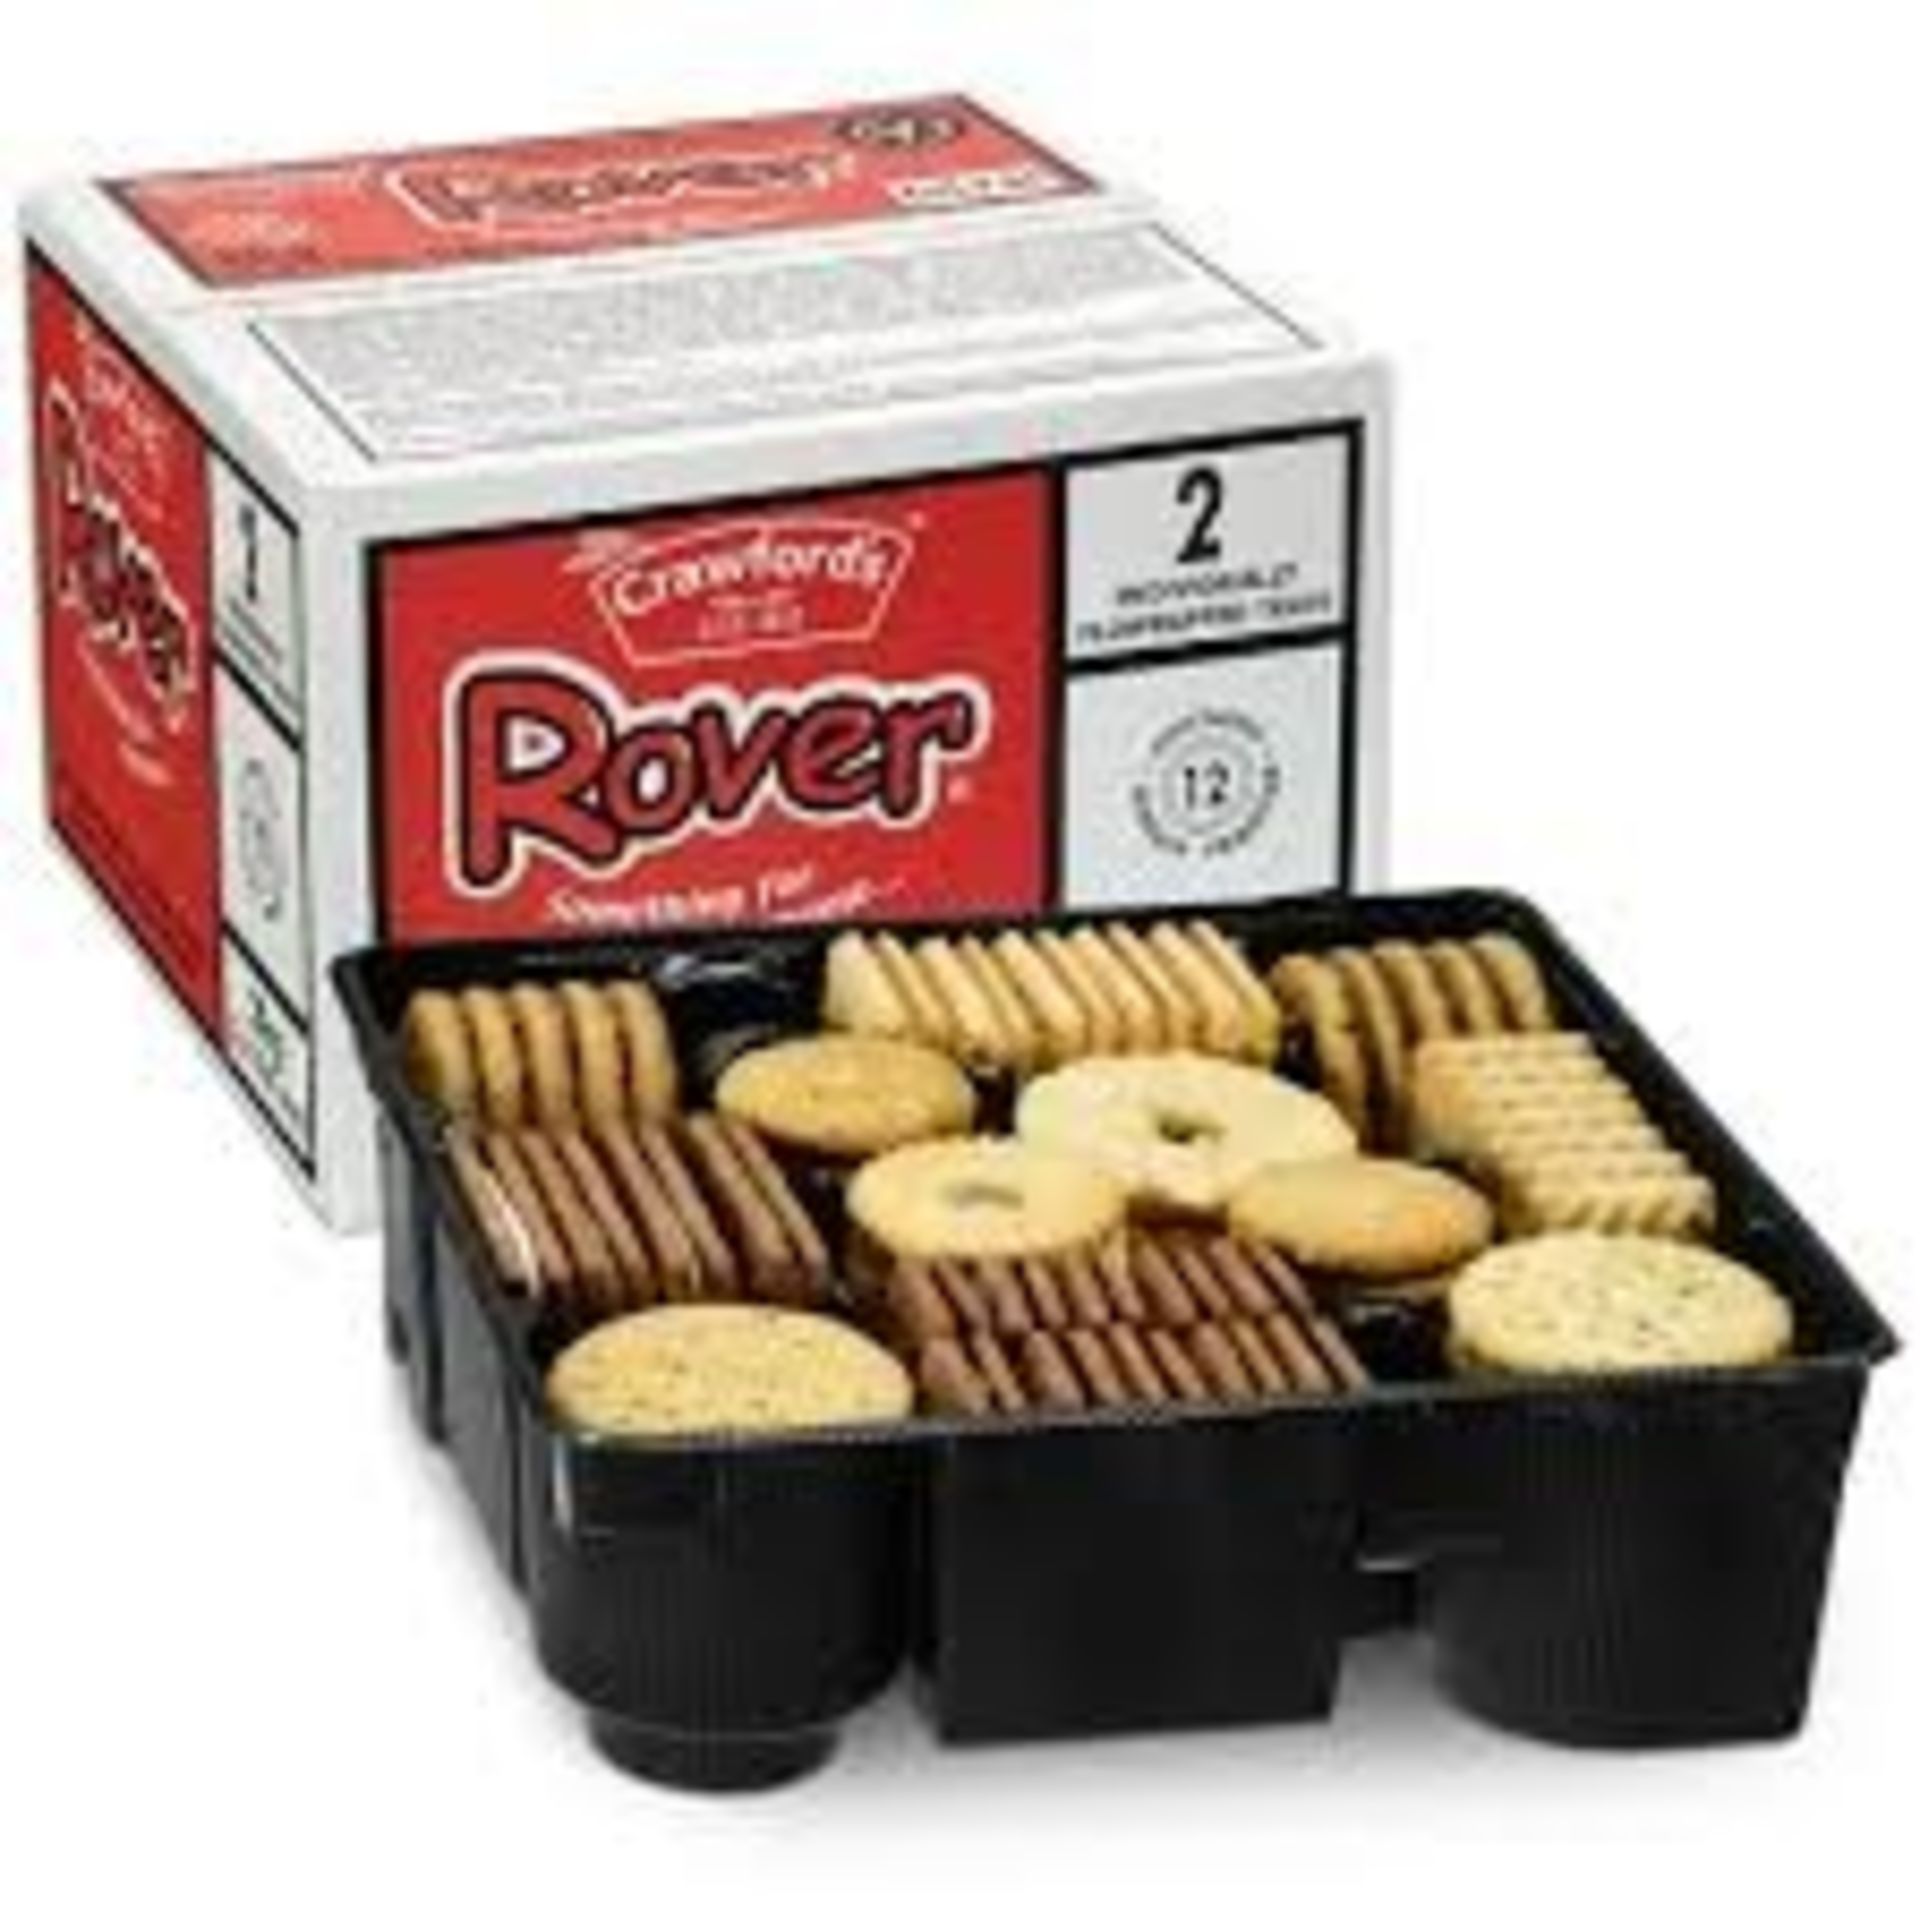 1 LOT TO CONTAIN 2 BOXES OF CRAWFORDS ROVER BISCUITS / EACH BOX CONTAINS 4 INDIVIDUALLY